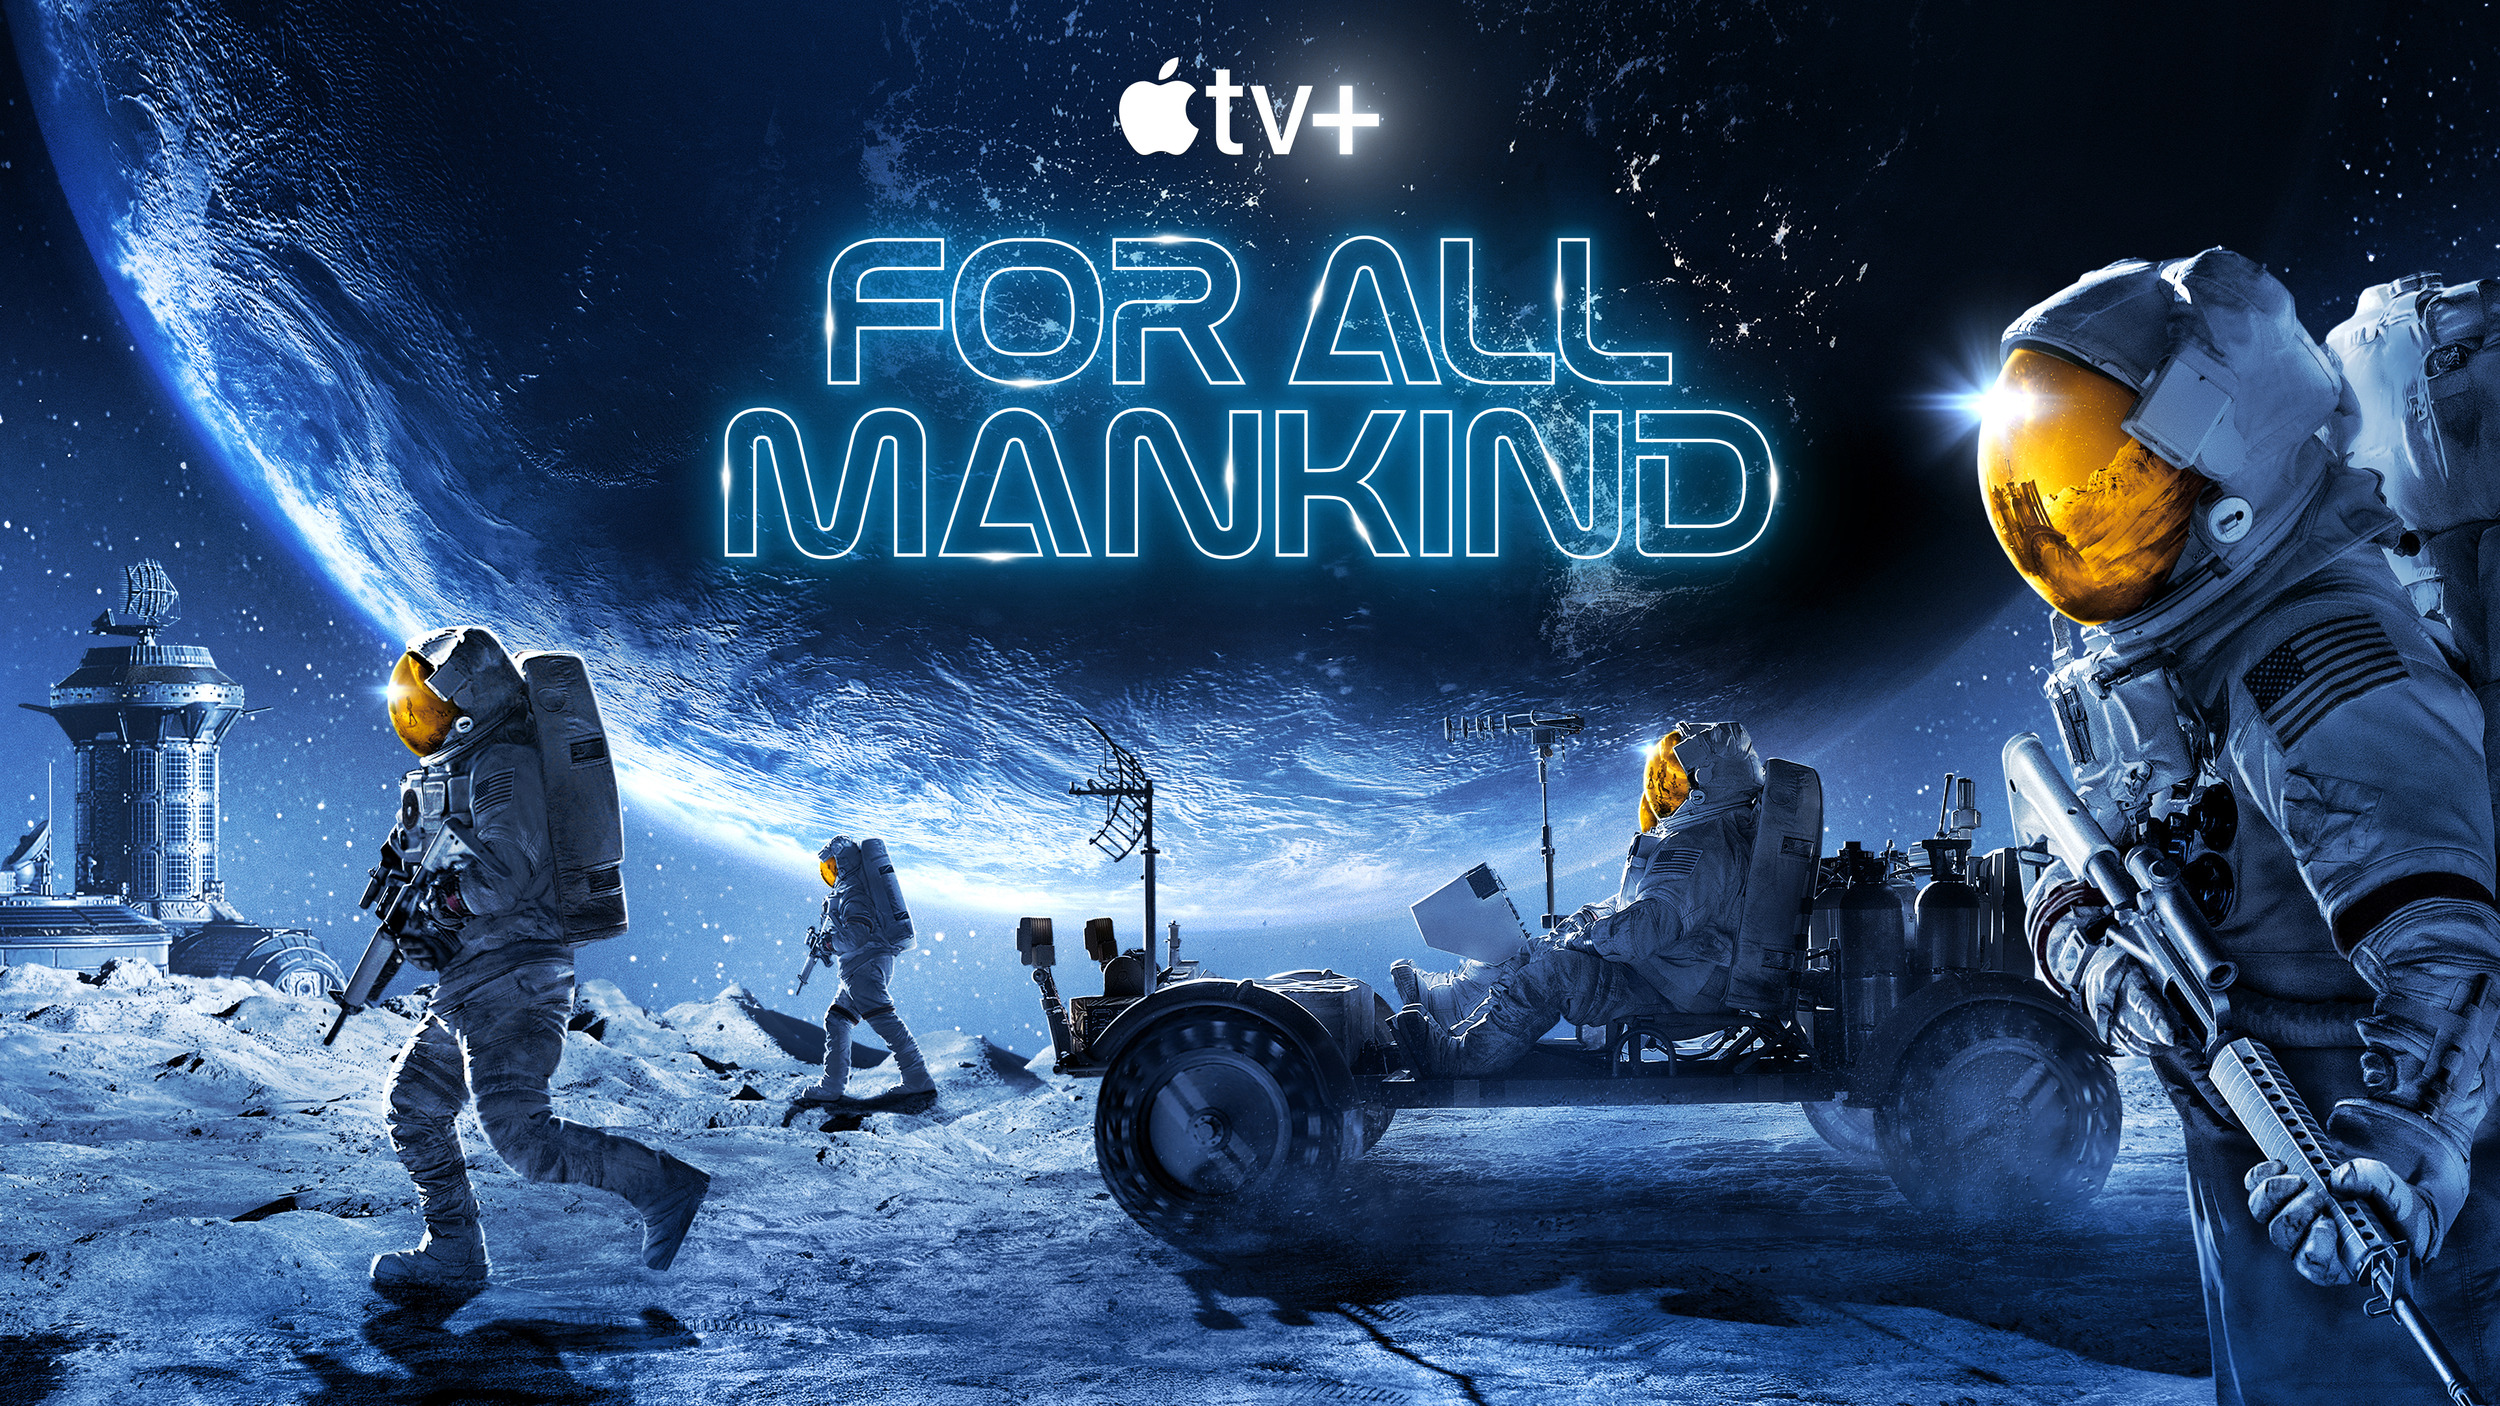 Mega Sized Movie Poster Image for For All Mankind (#4 of 6)